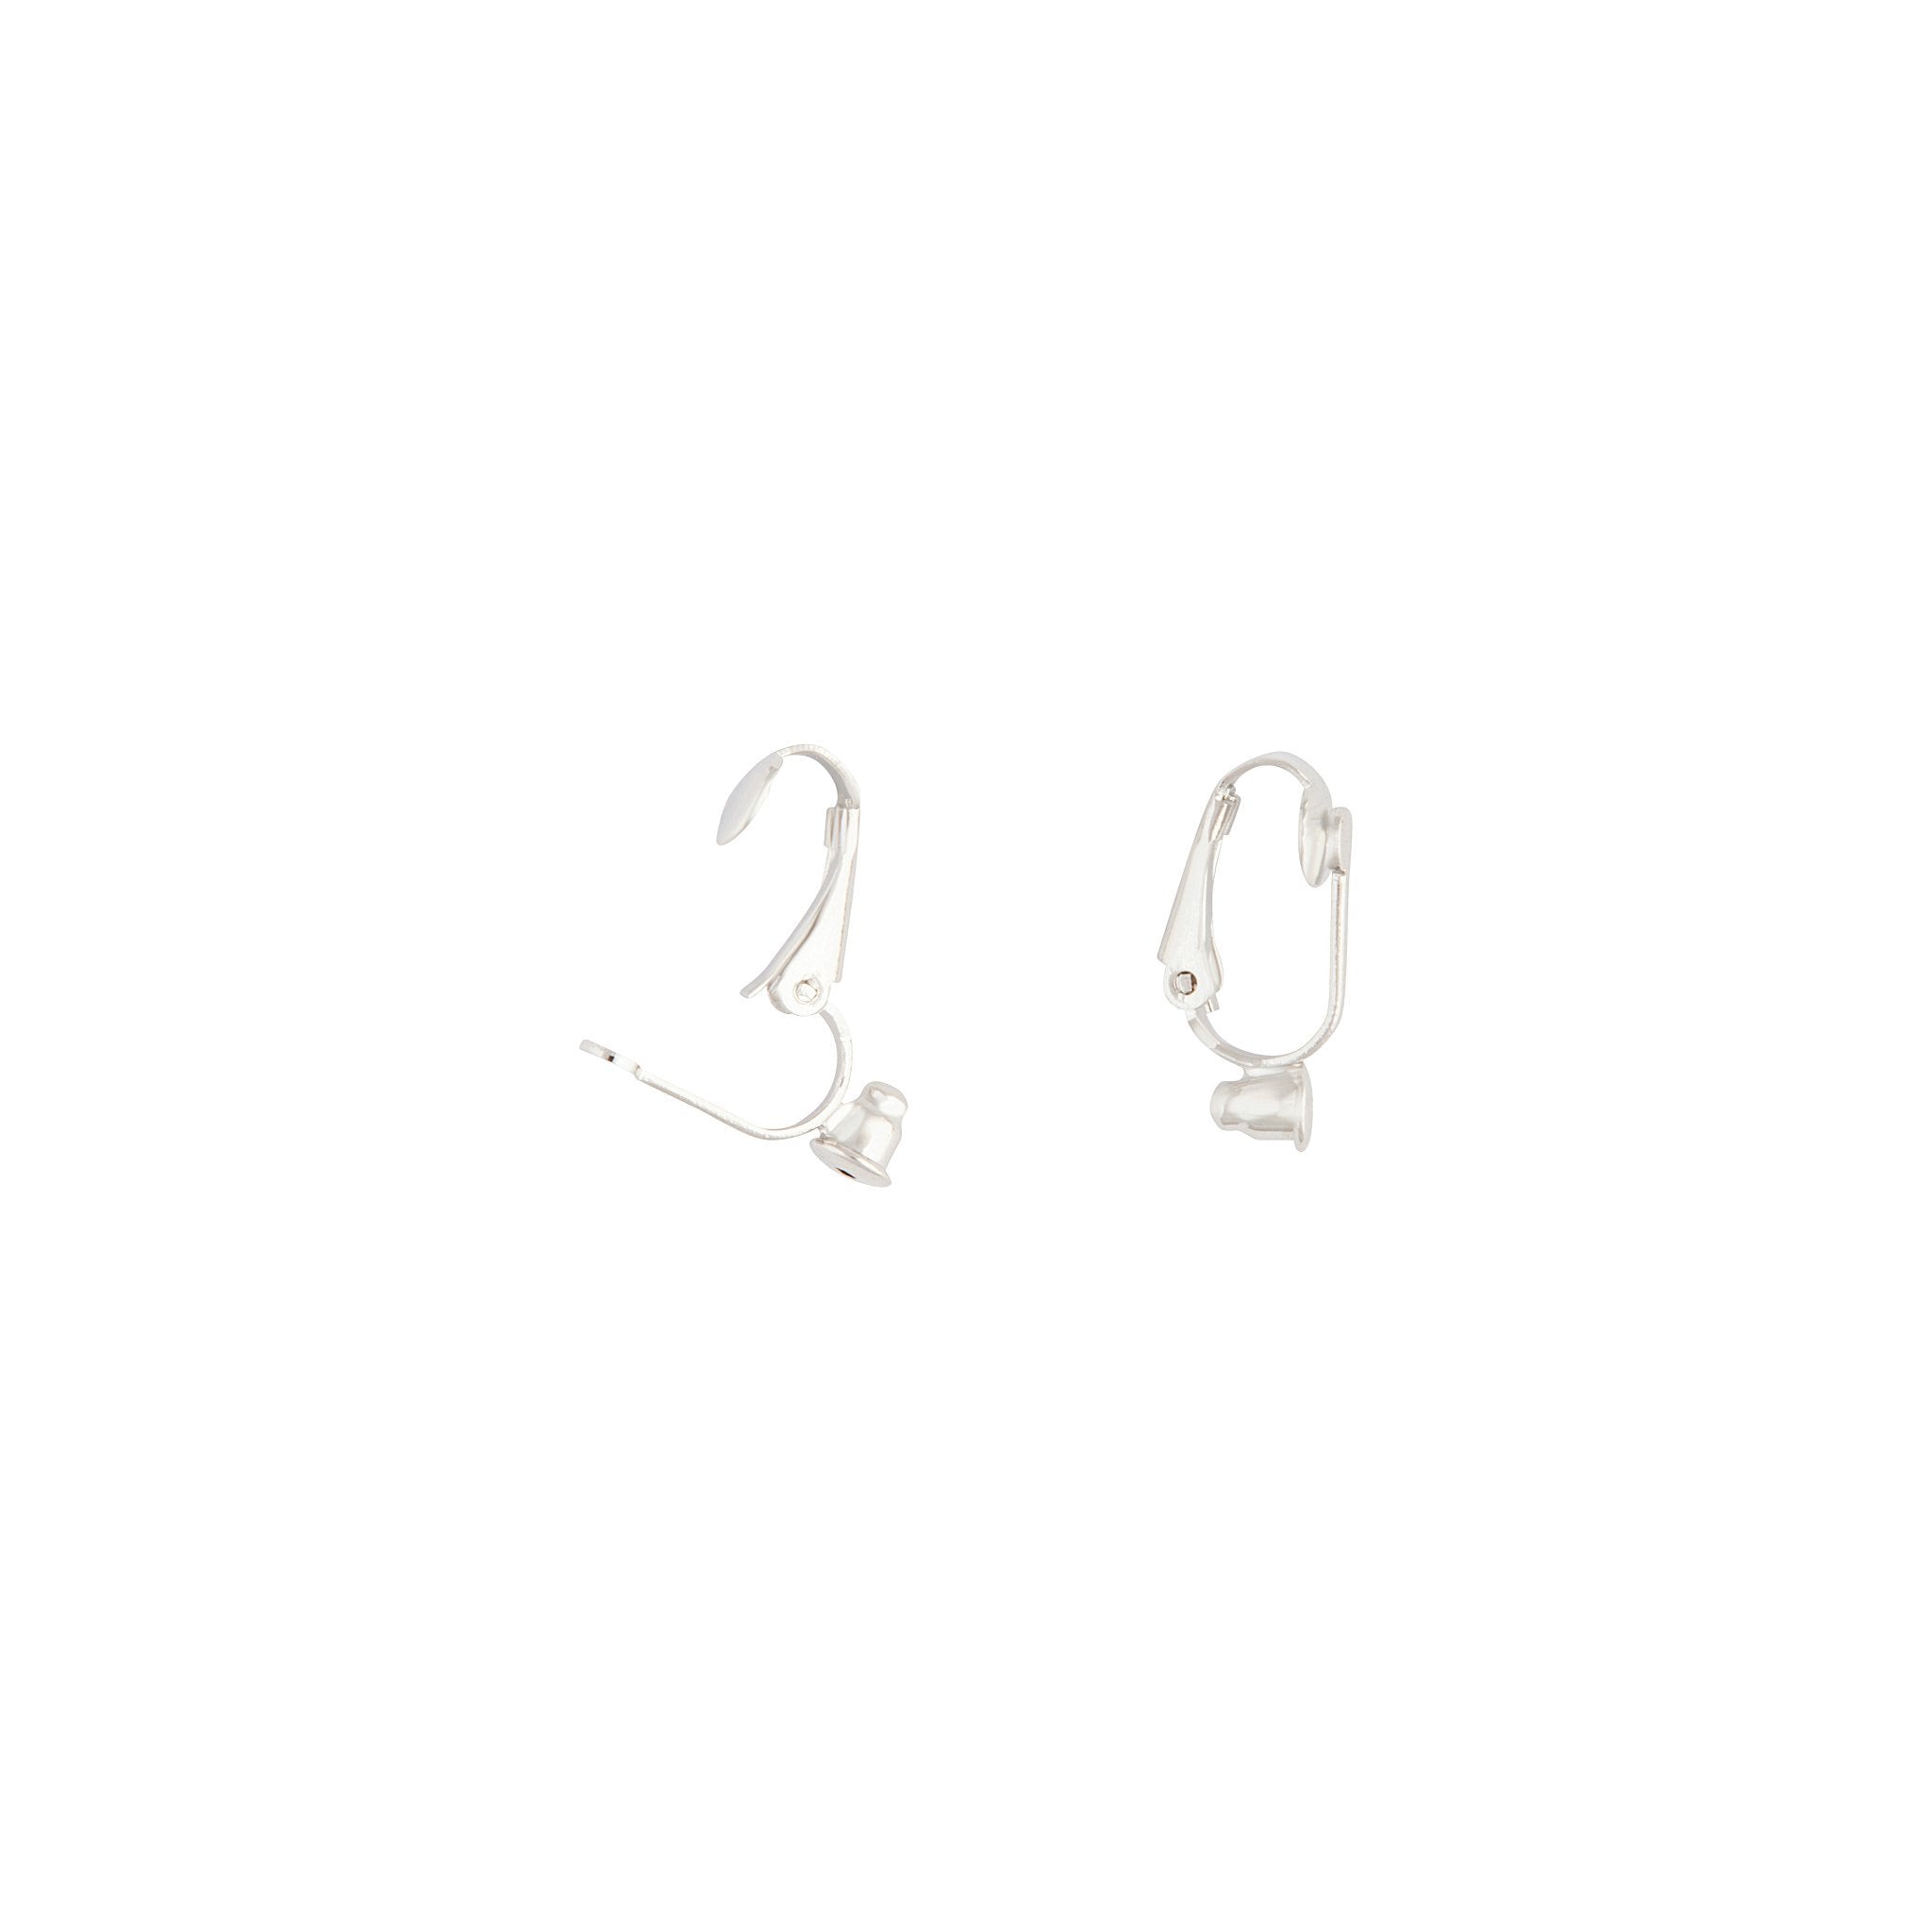  AoedeJ 2 Pairs Silicone Clear Earrings for Sports Work  Hypoallergenic Earring Posts Invisible Earrings Plastic Earrings for  Sensitive Ears: Clothing, Shoes & Jewelry